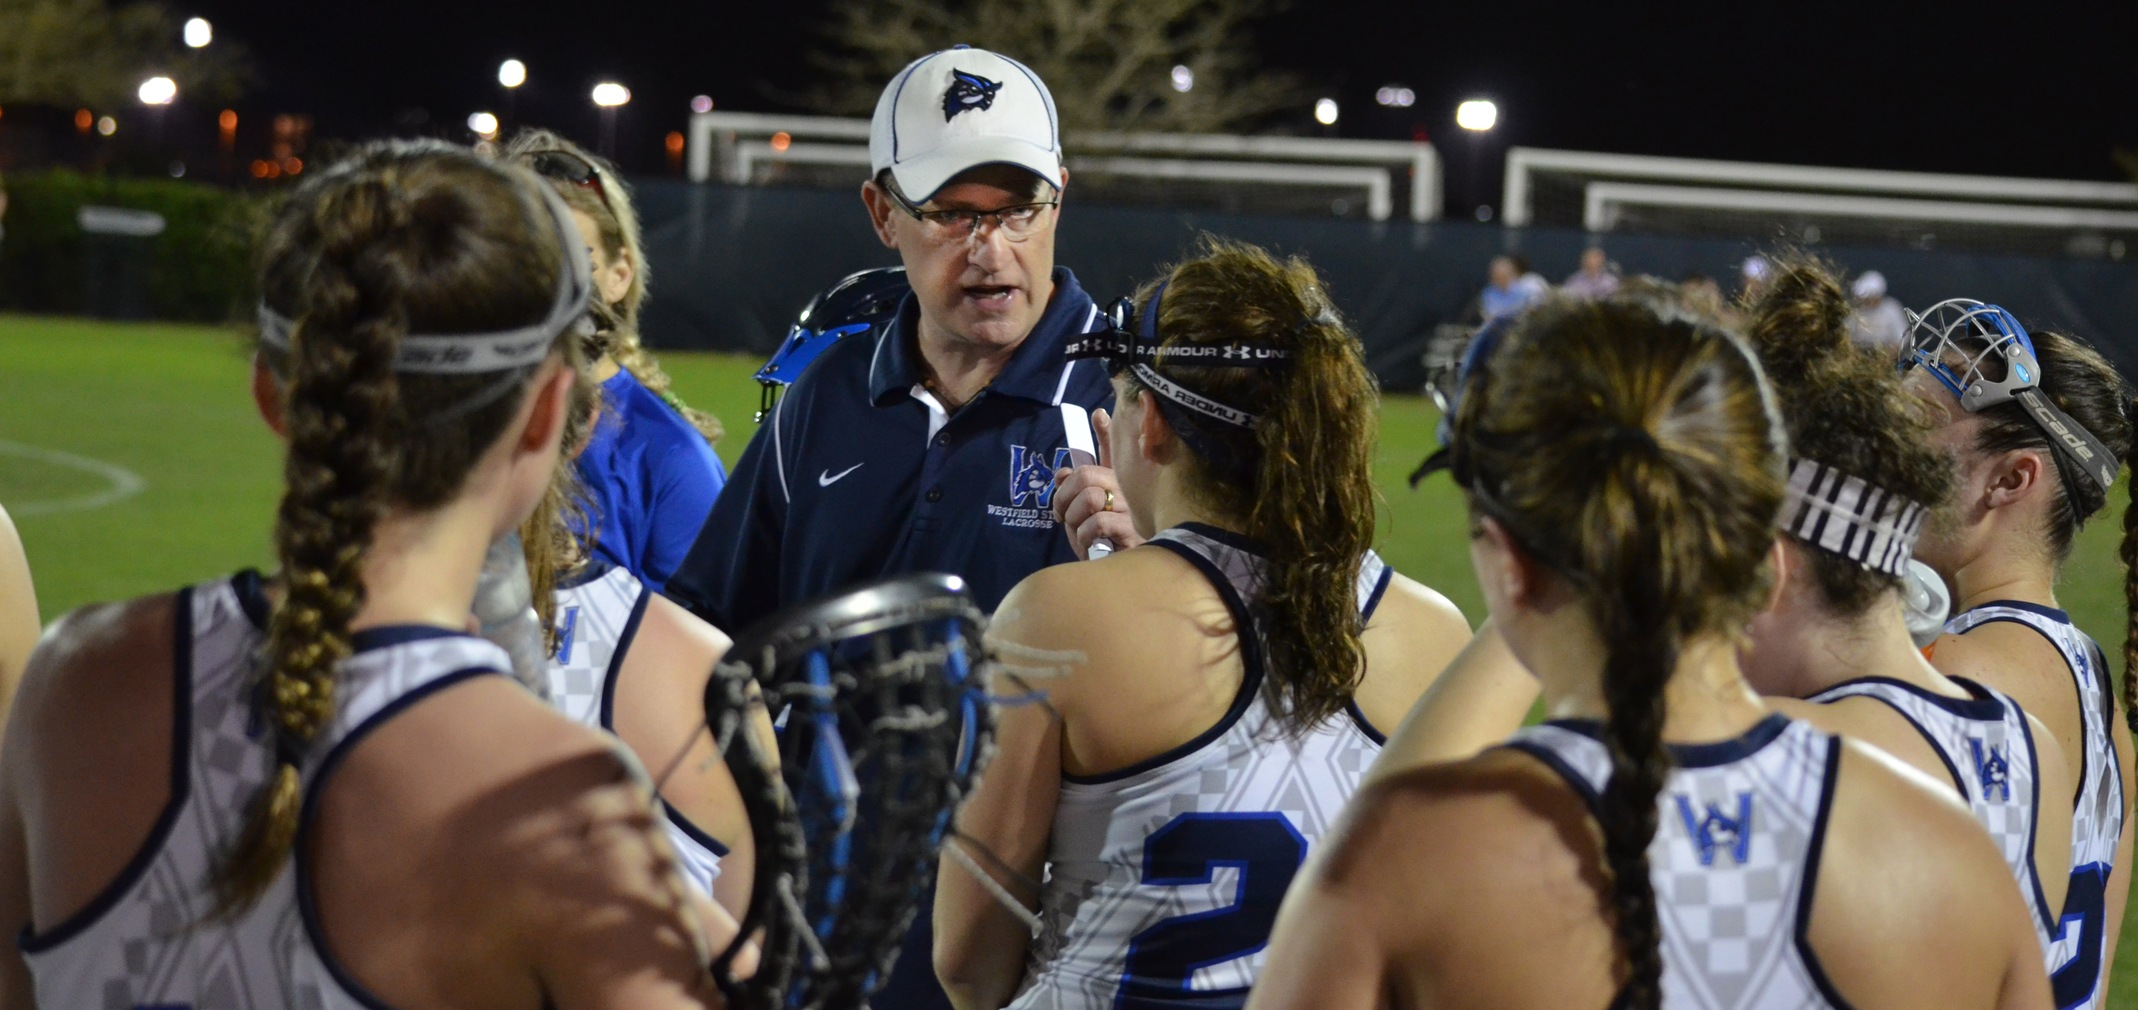 Jeff Pechulis coaches the Owls women's lacrosse team in Florida in 2015